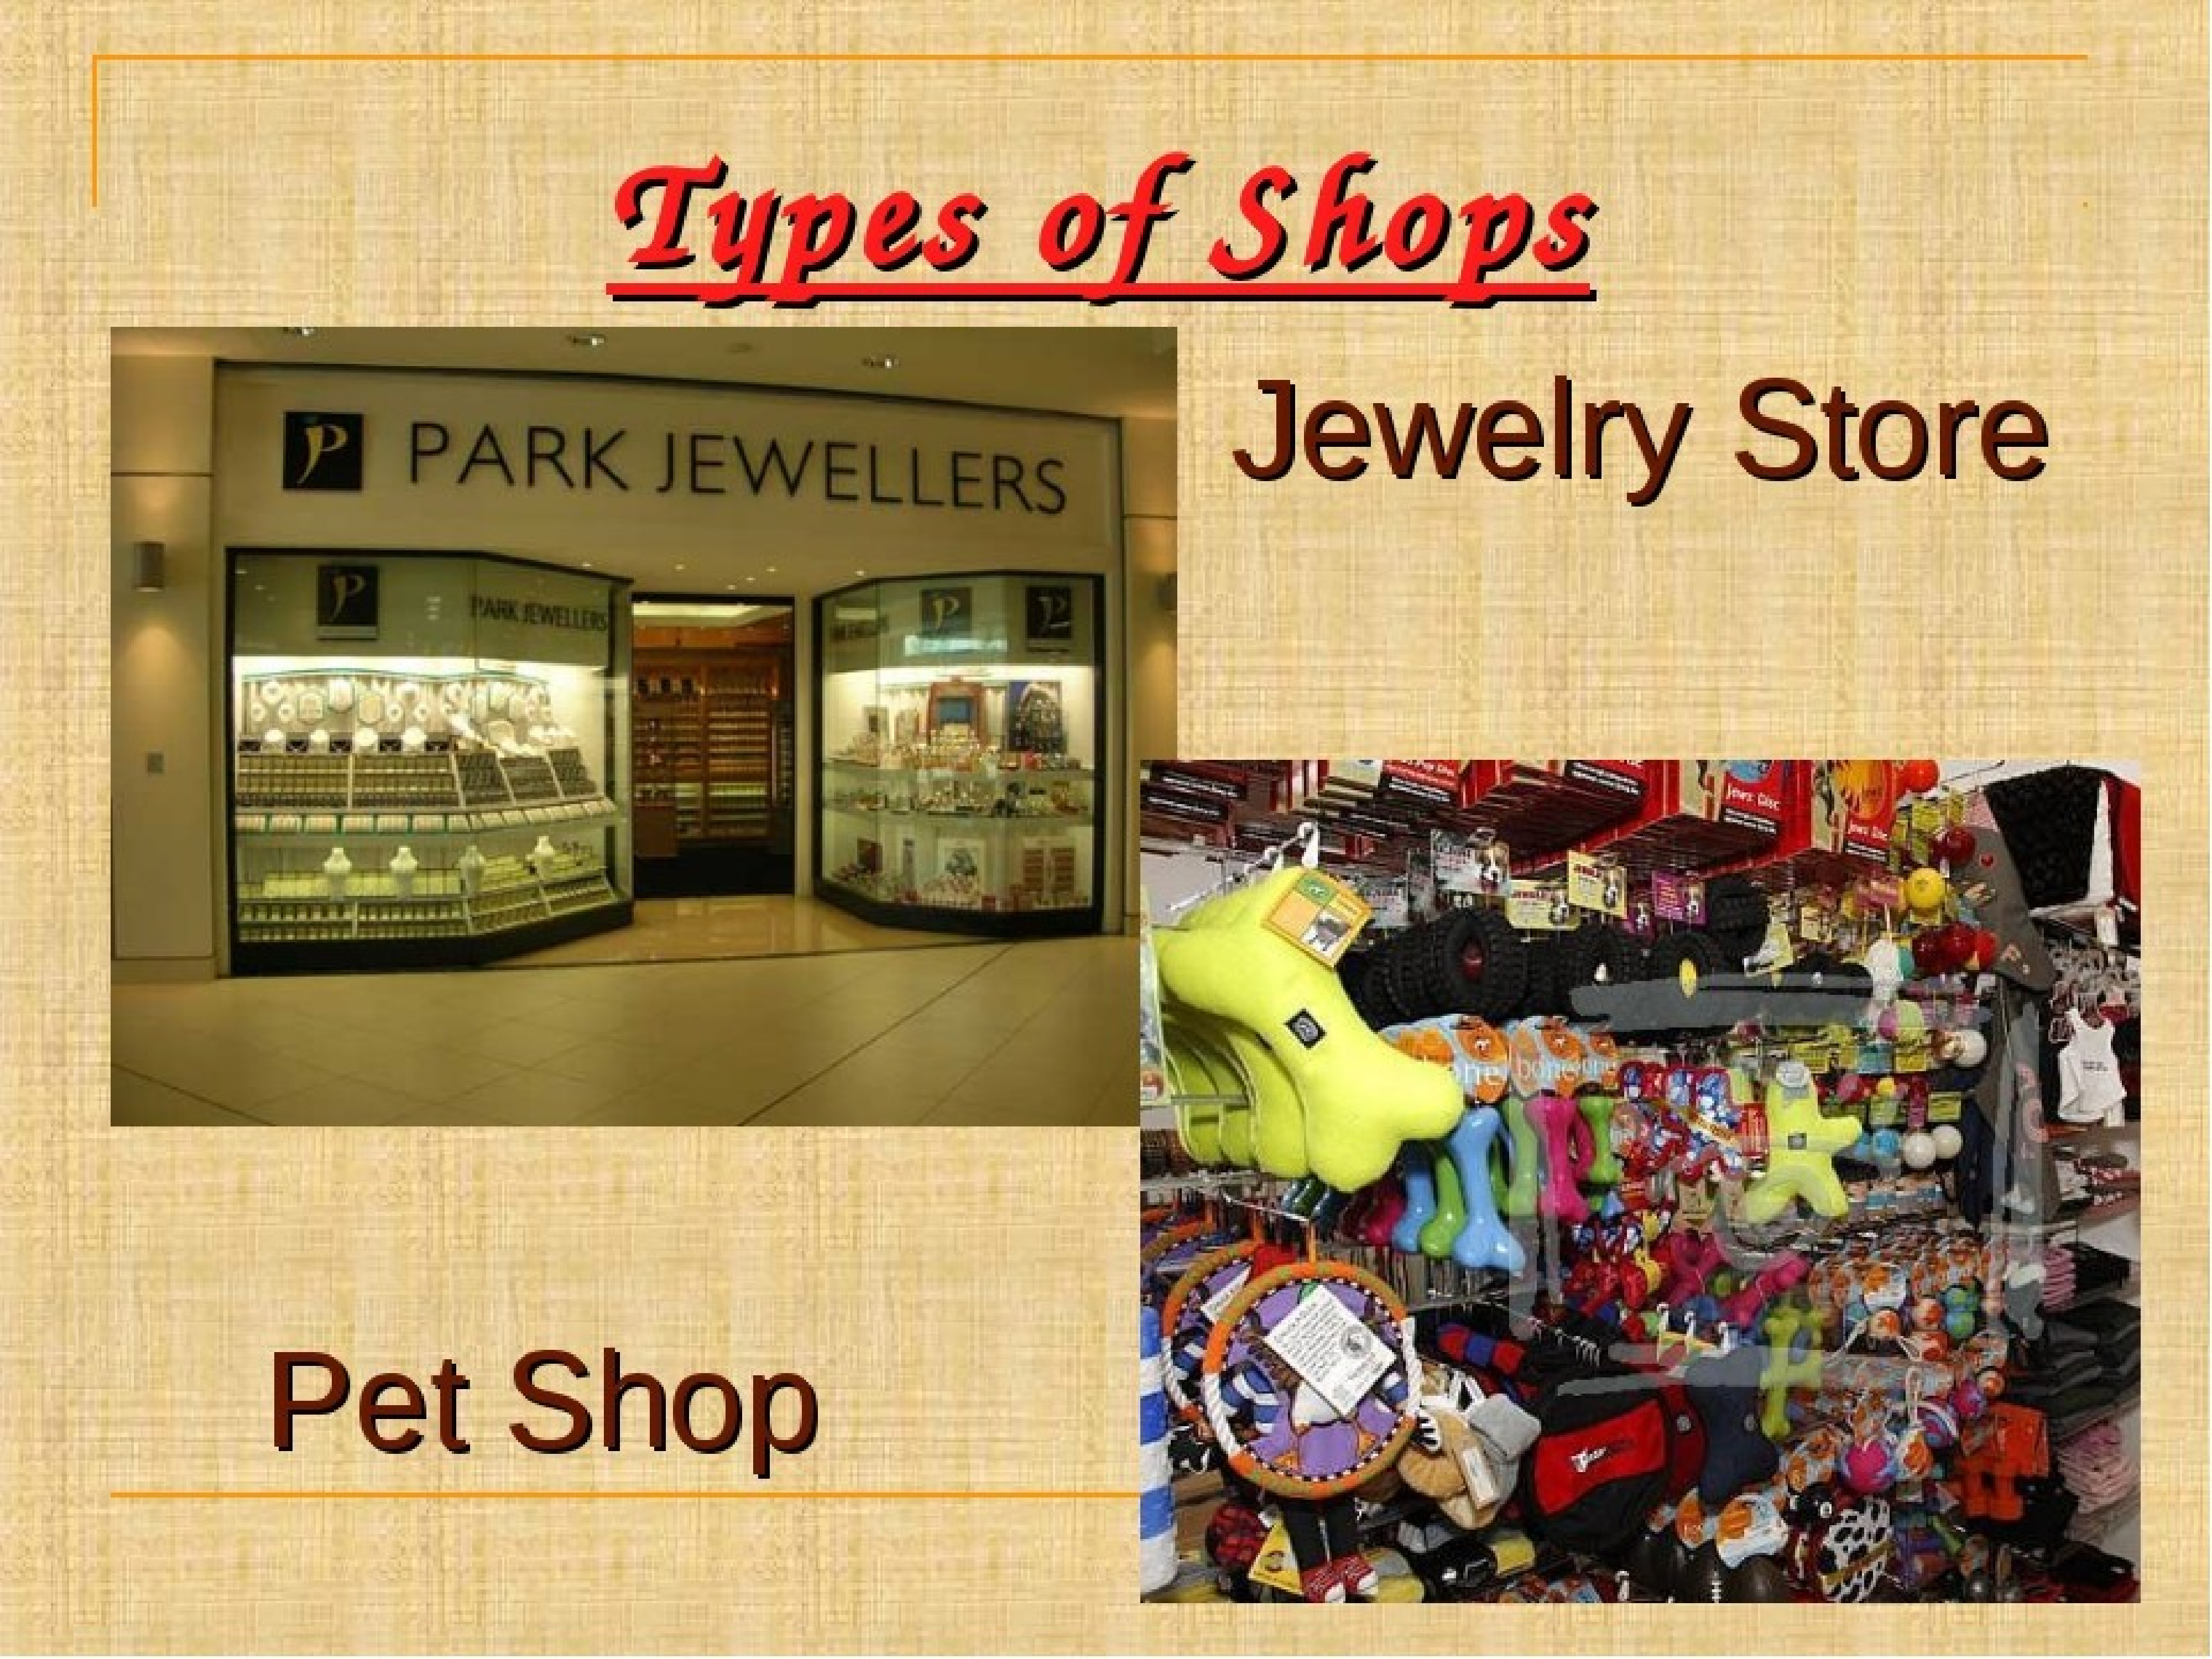 Shops and shopping in great. Kinds of shops. Shops виды. Презентация in the shop. Types of shops.